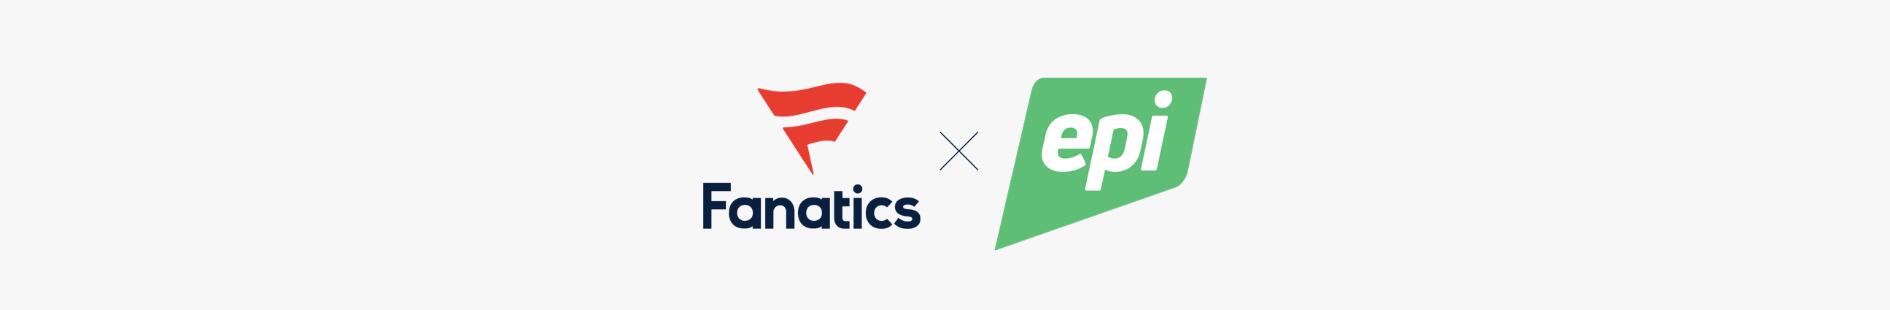 Fanatics Acquires Italian Counterpart EPI, Gaining Control of Top Football Club Resources in Italy